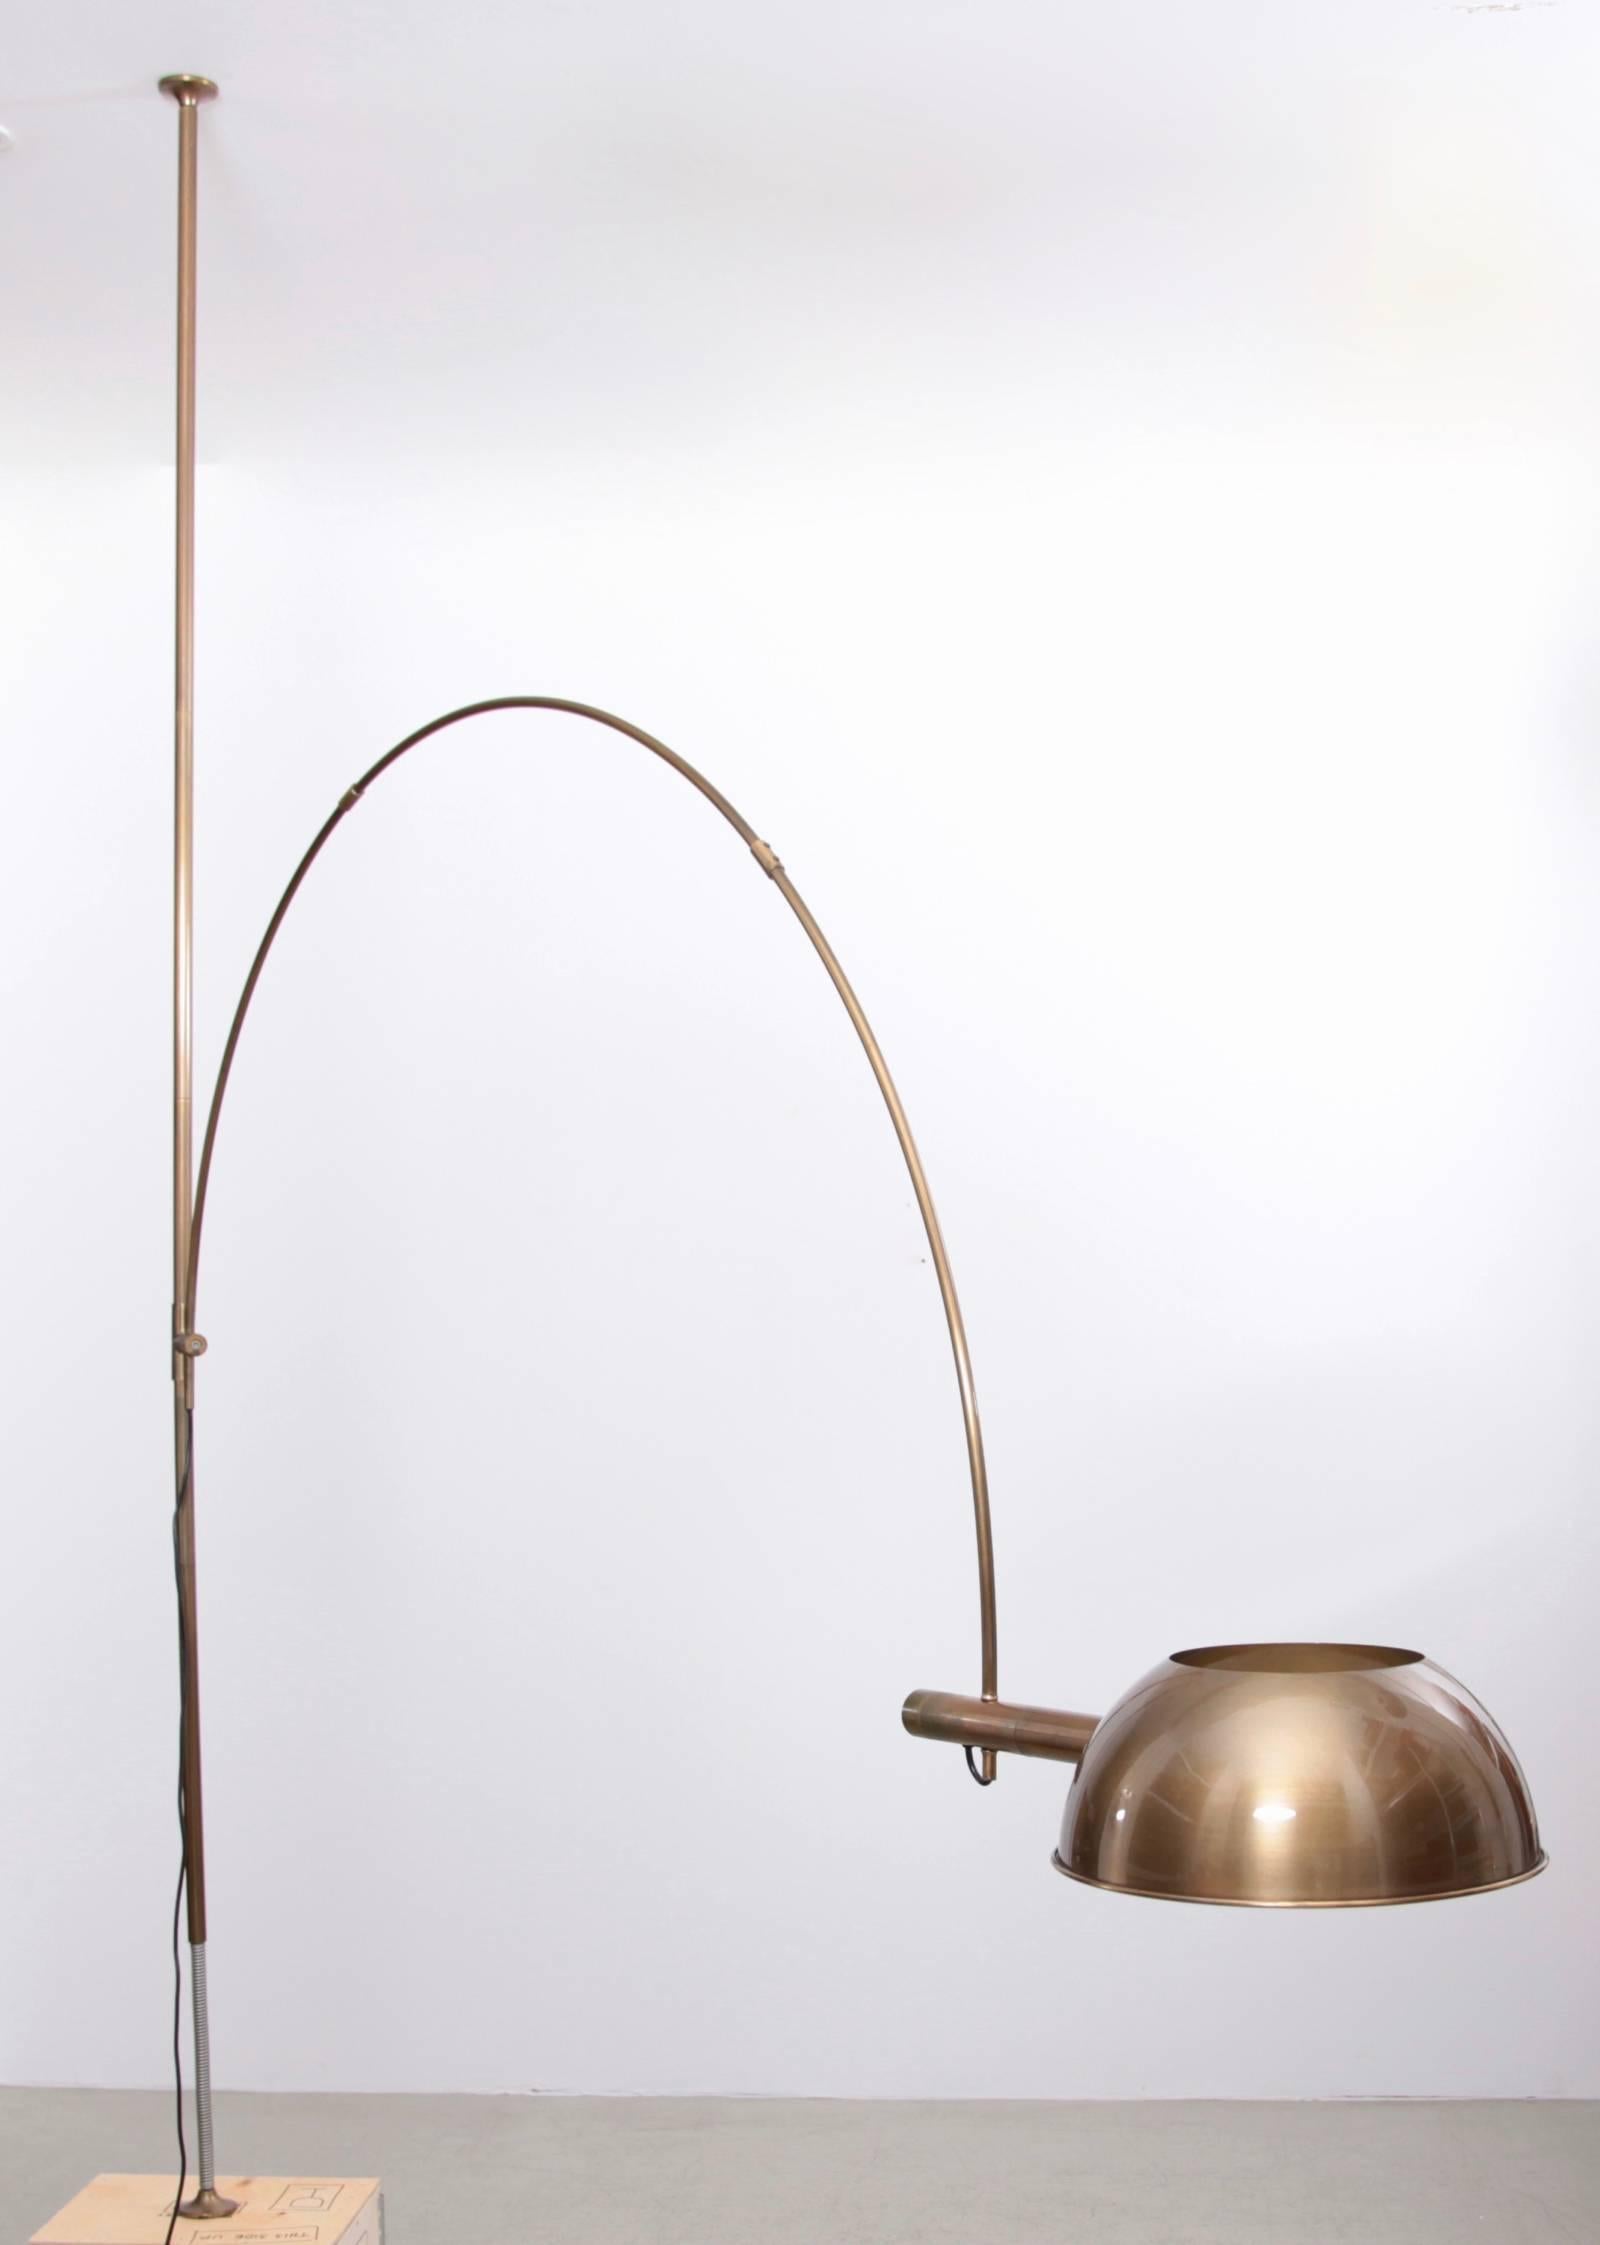 Rare early version of a floor lamp by Florian Schulz that is clasped between ceiling and floor. The height of the Arc can be adjusted on a sliding scale to any desired height. The angle of the shade can also be adjusted almost 360 degrees. The lamp